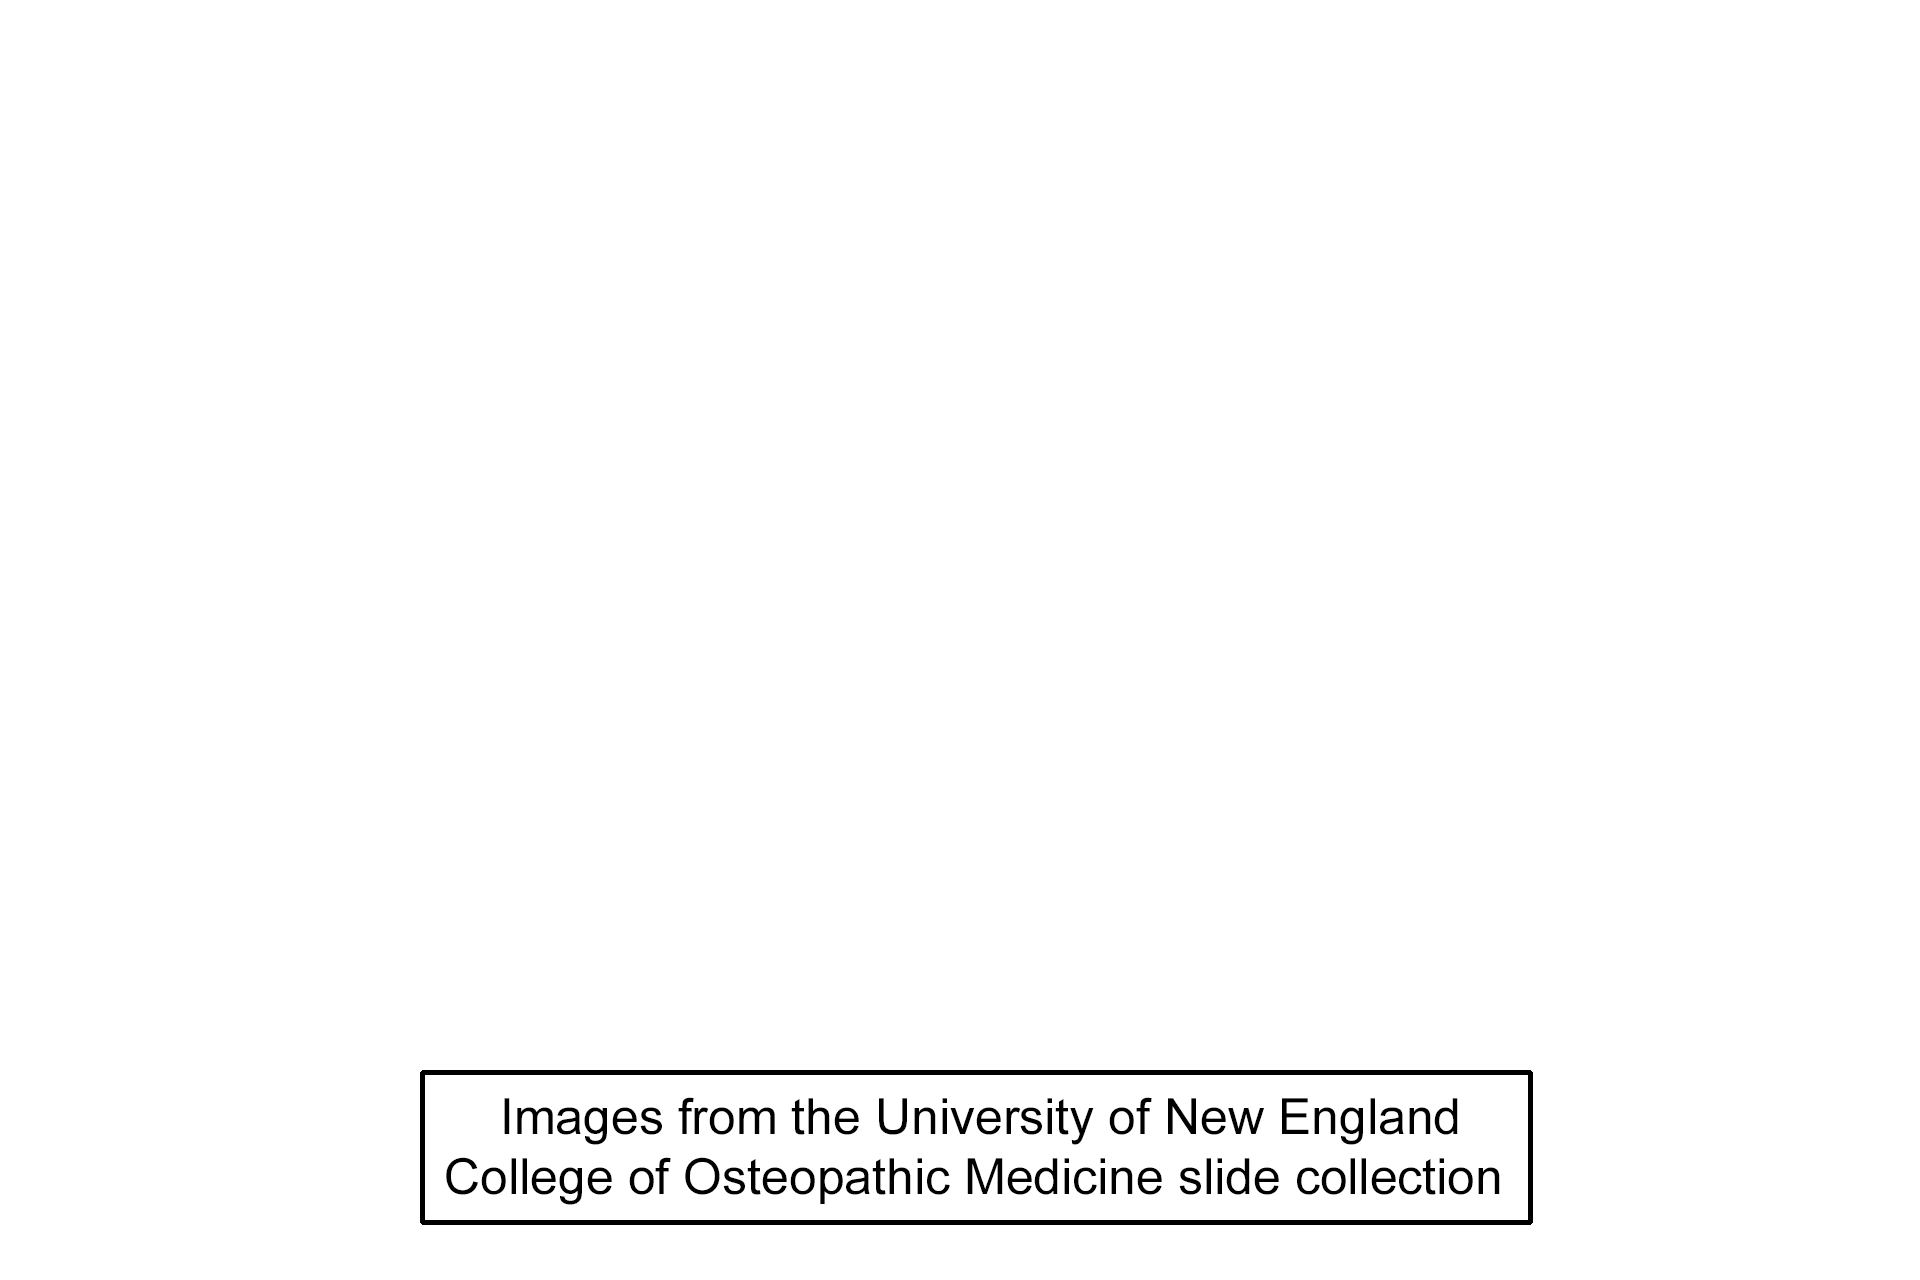 Image source > <p>Images take of a slide from the University of New England College of Osteopathic Medicine slide collection.</p>
